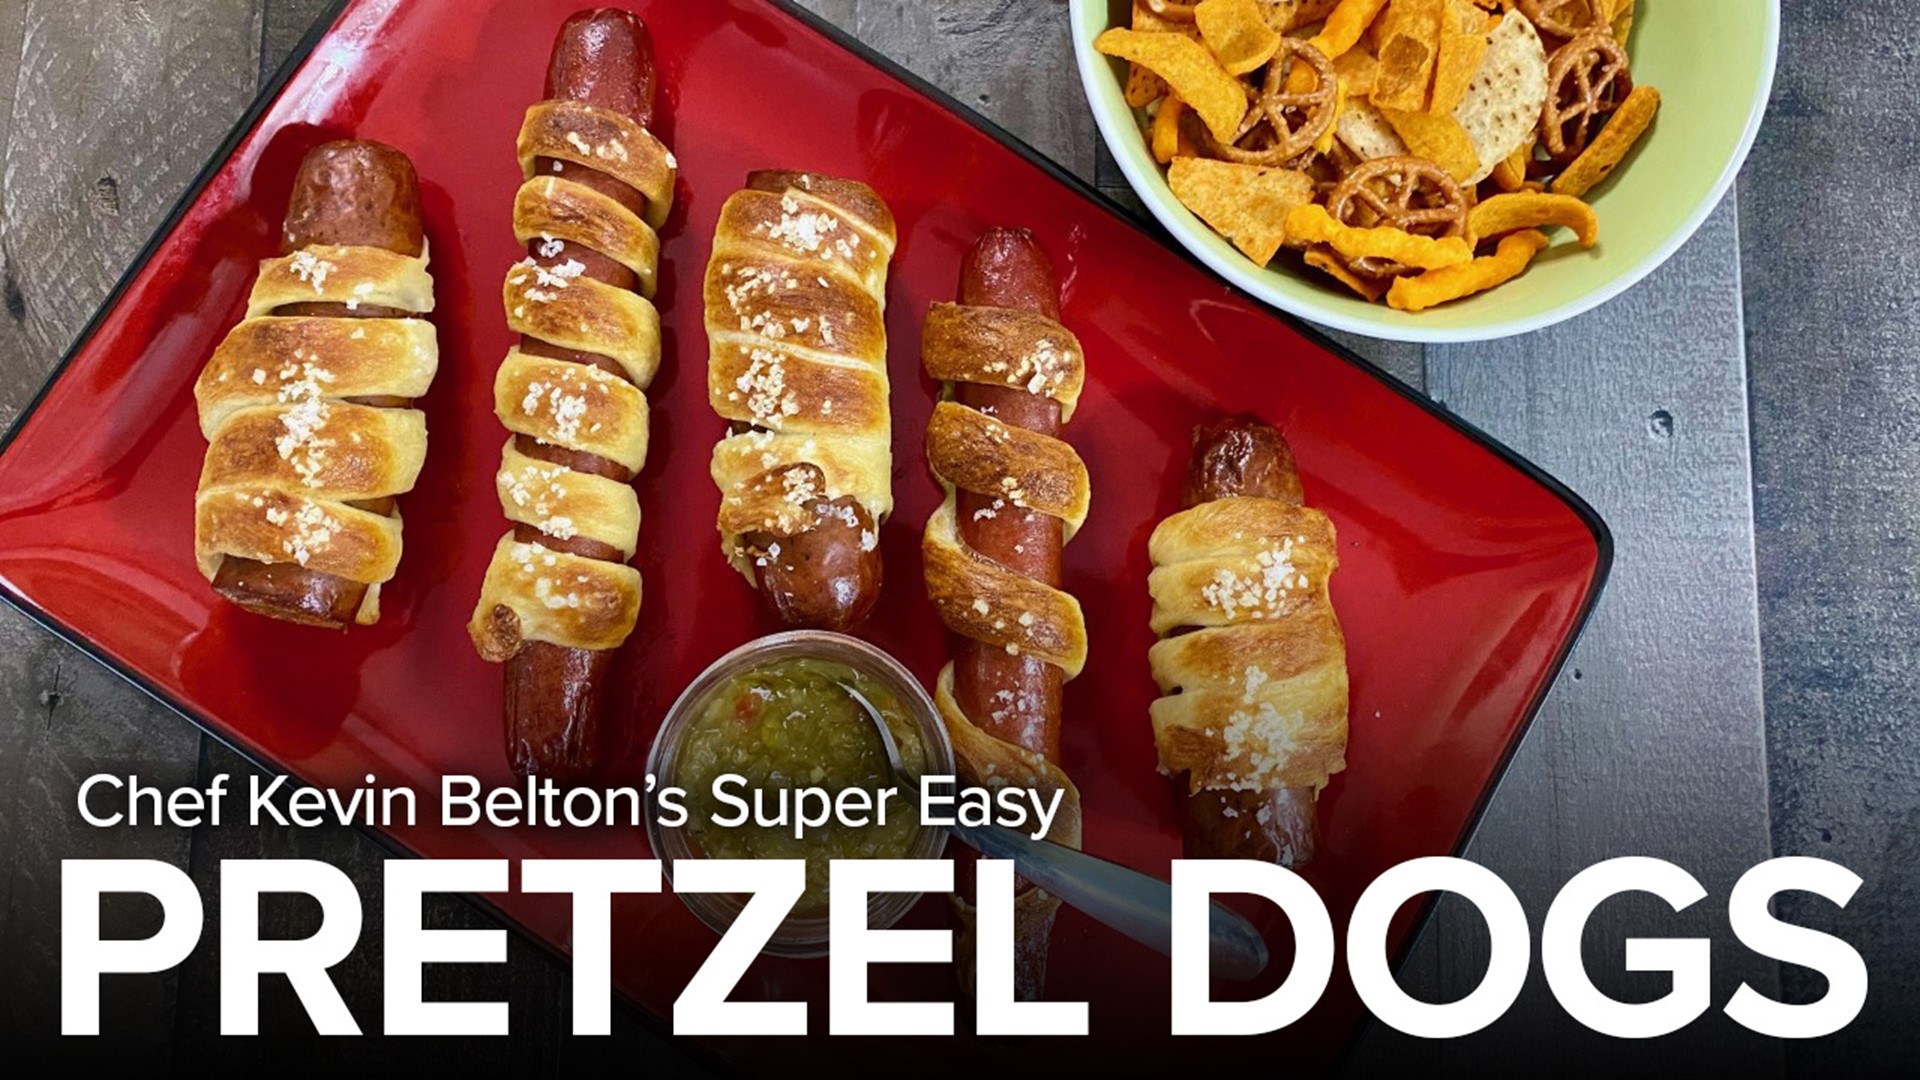 I love a good hot dog and these pretzel dogs take them to the next level!